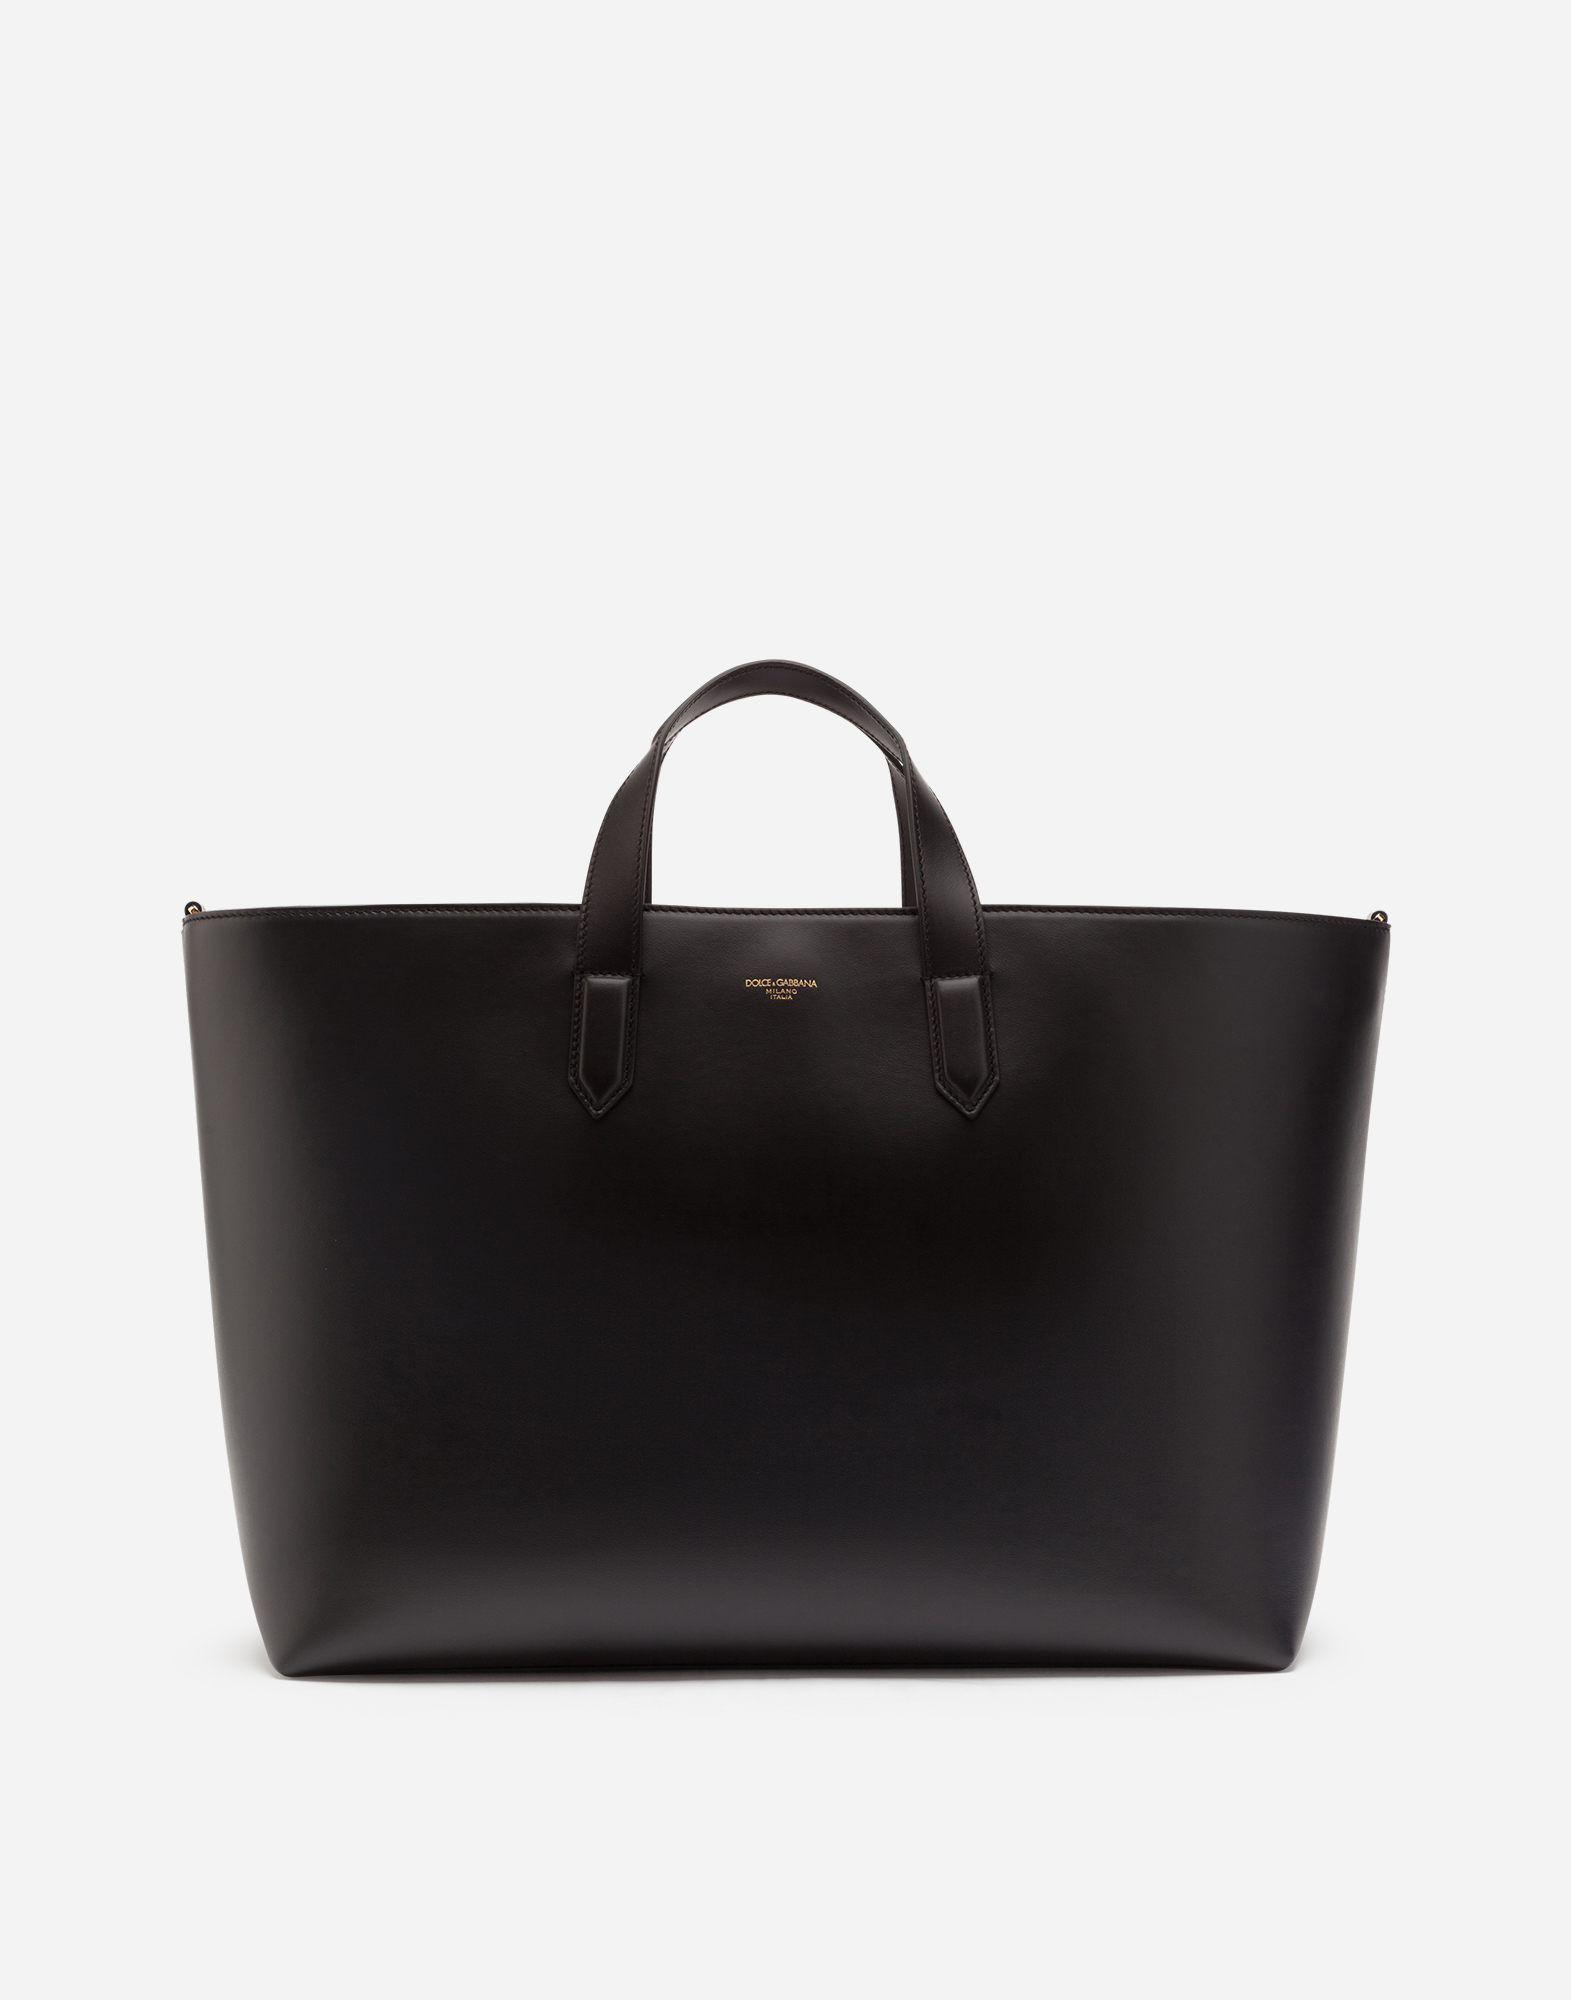 Calfskin Monreale bag with heat-stamped logo in Black